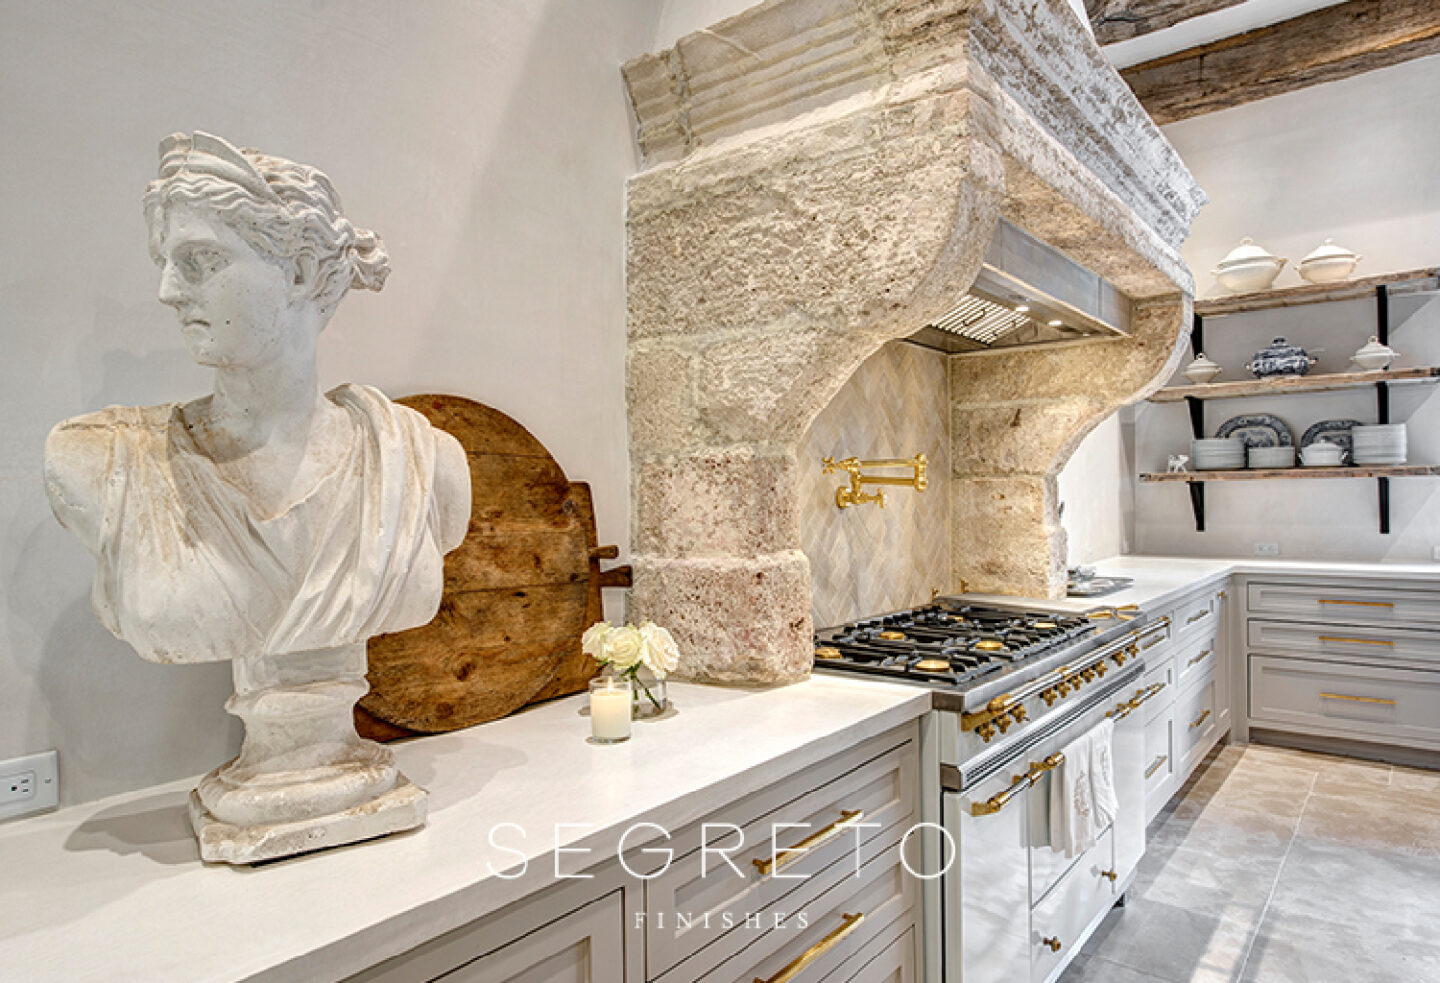 Old World style French country kitchen with ancient materials and finish work by Segreto Finishes.